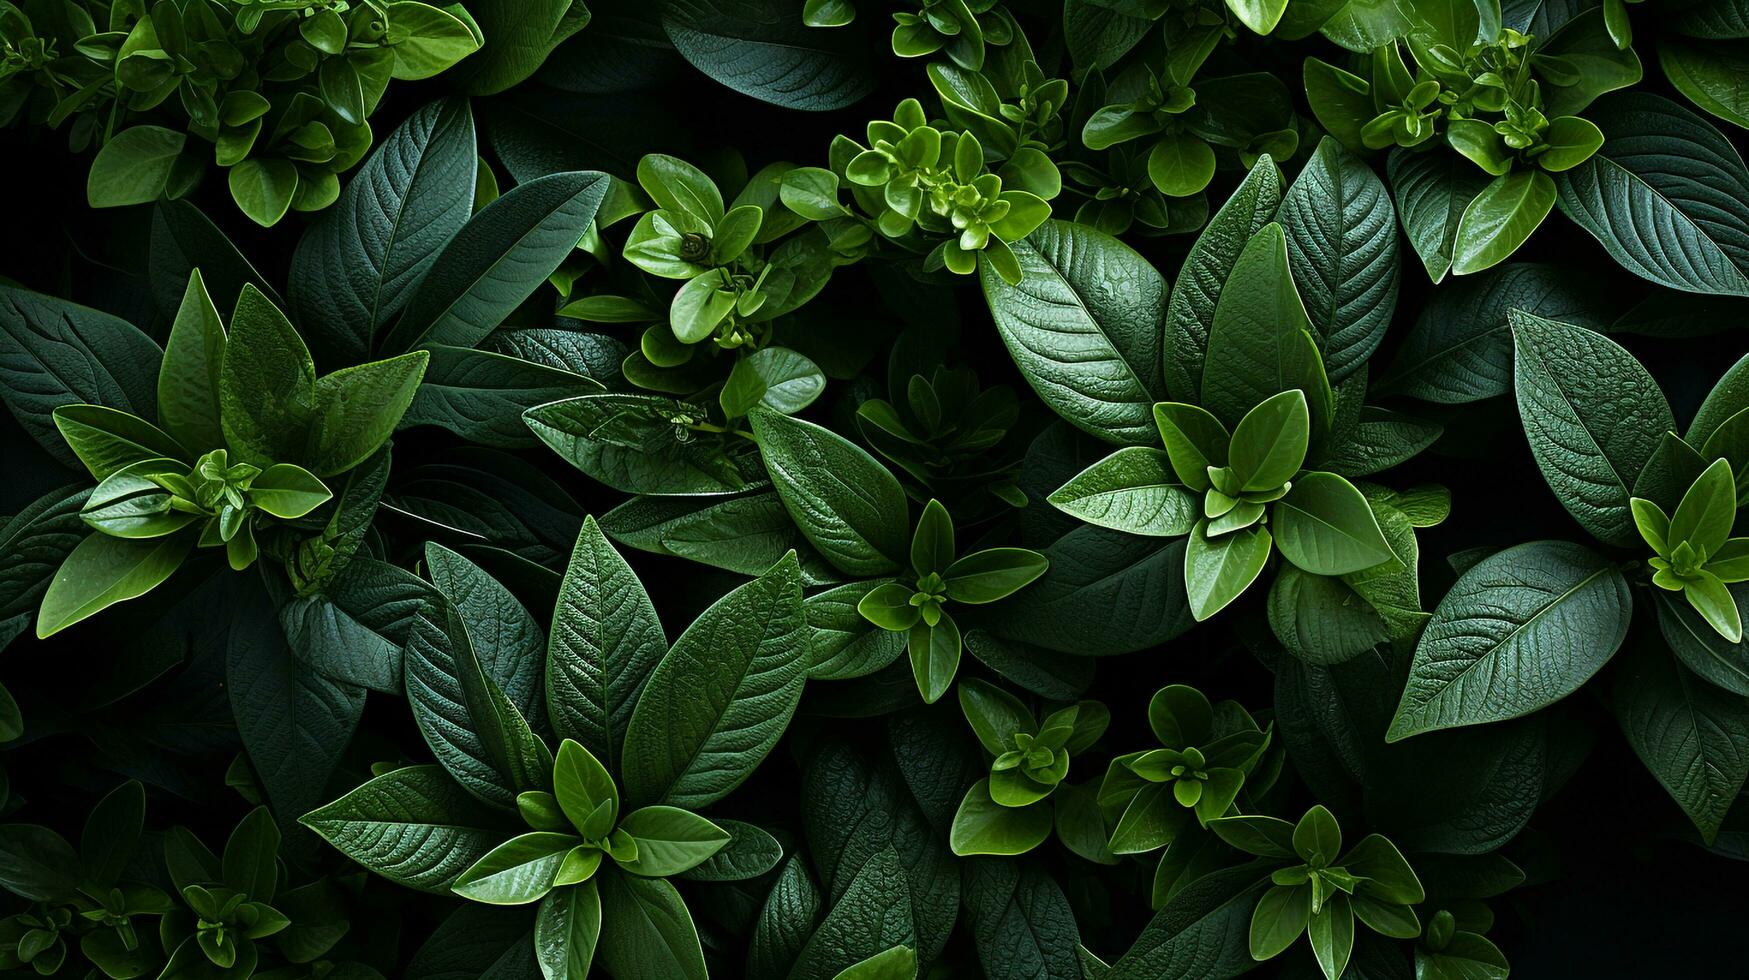 Plants 4K Ultra HD Wallpapers, HD Plants 3840x2160 Backgrounds, Free Images  Download